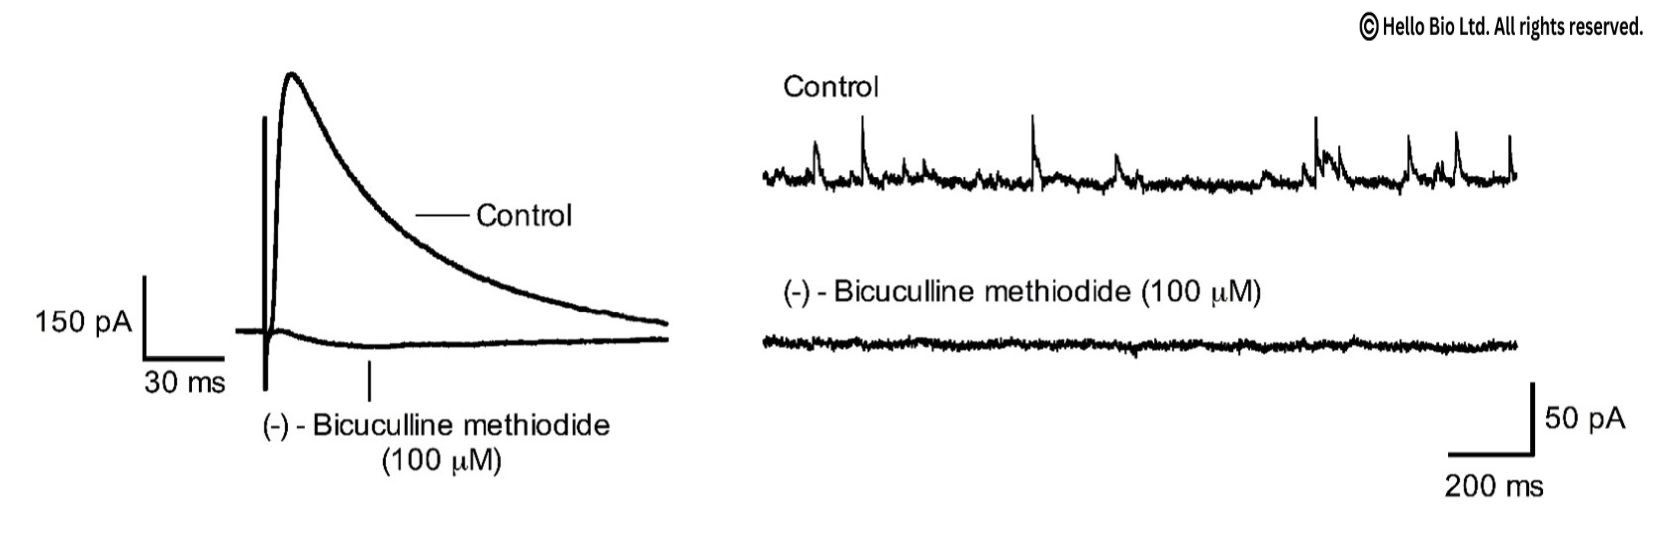 Figure 1. Bicuculline methiodide inhibition of evoked and spontaneous GABAA-R mediated IPSCs in mouse cortical neurons